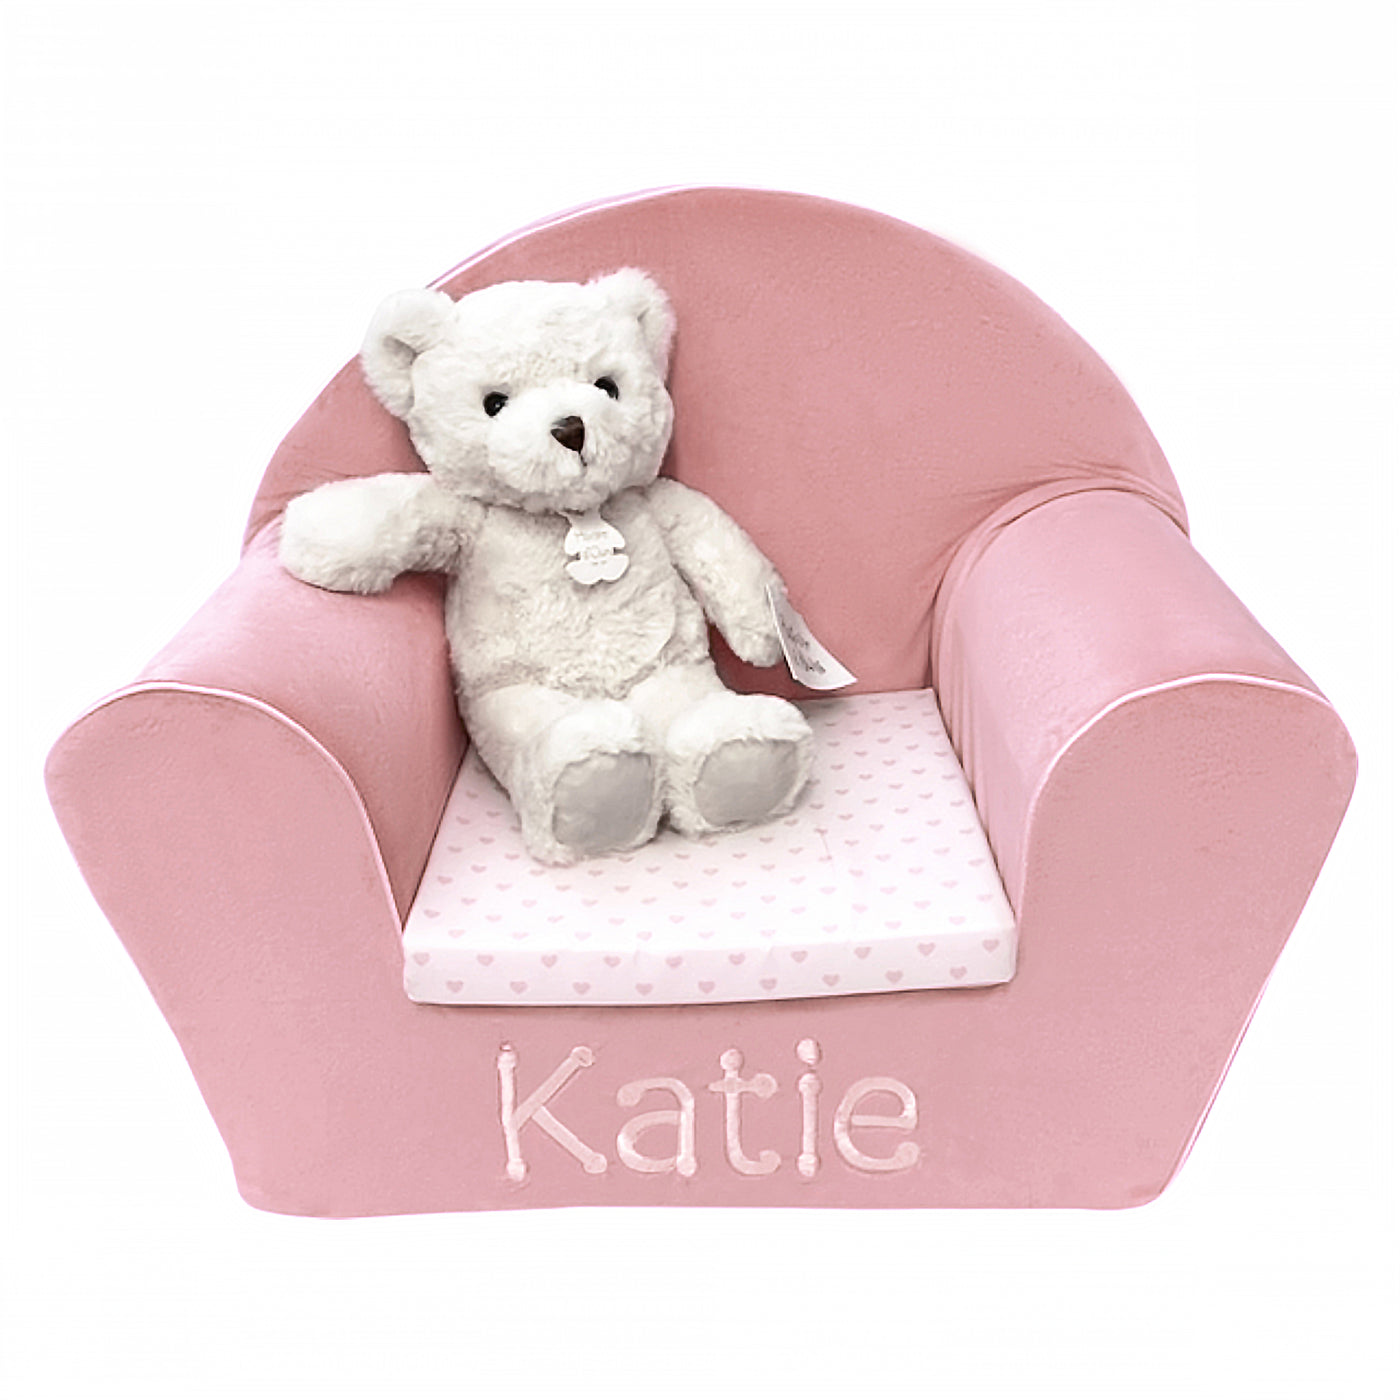 Personalised Chair for Girls with Luxurious White Teddy Bear